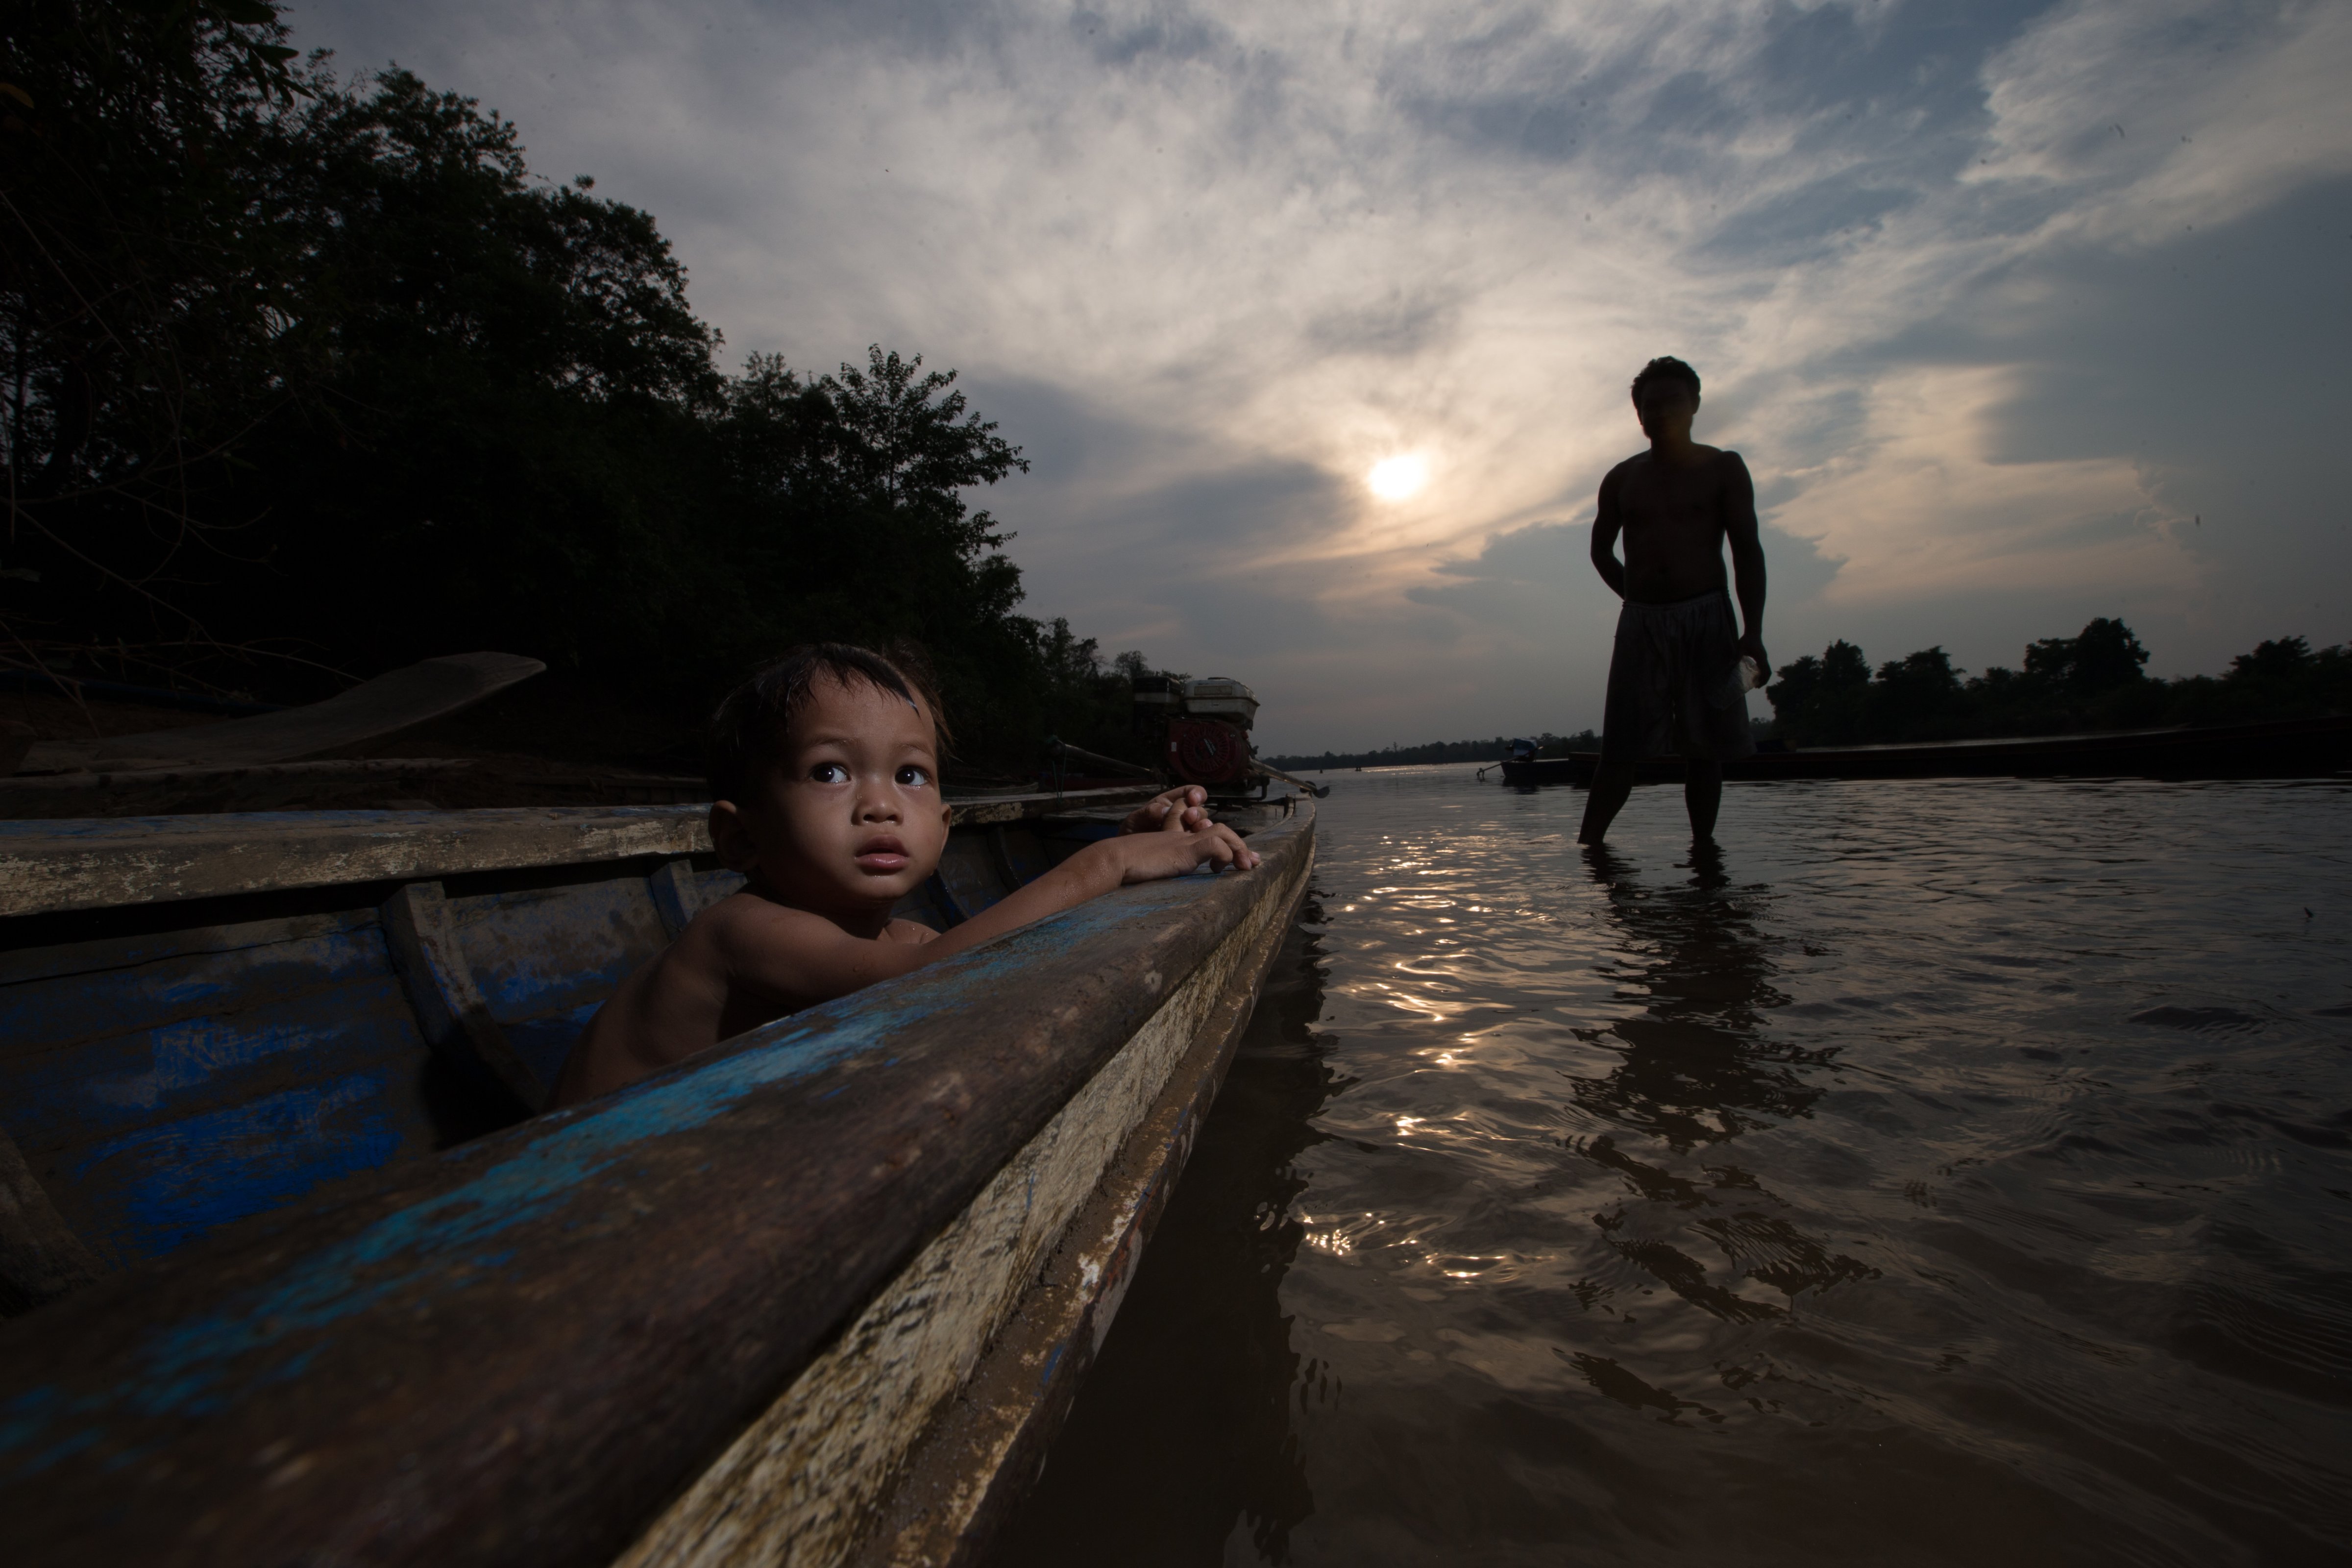 The Mekong River Under Threat From Dam Construction